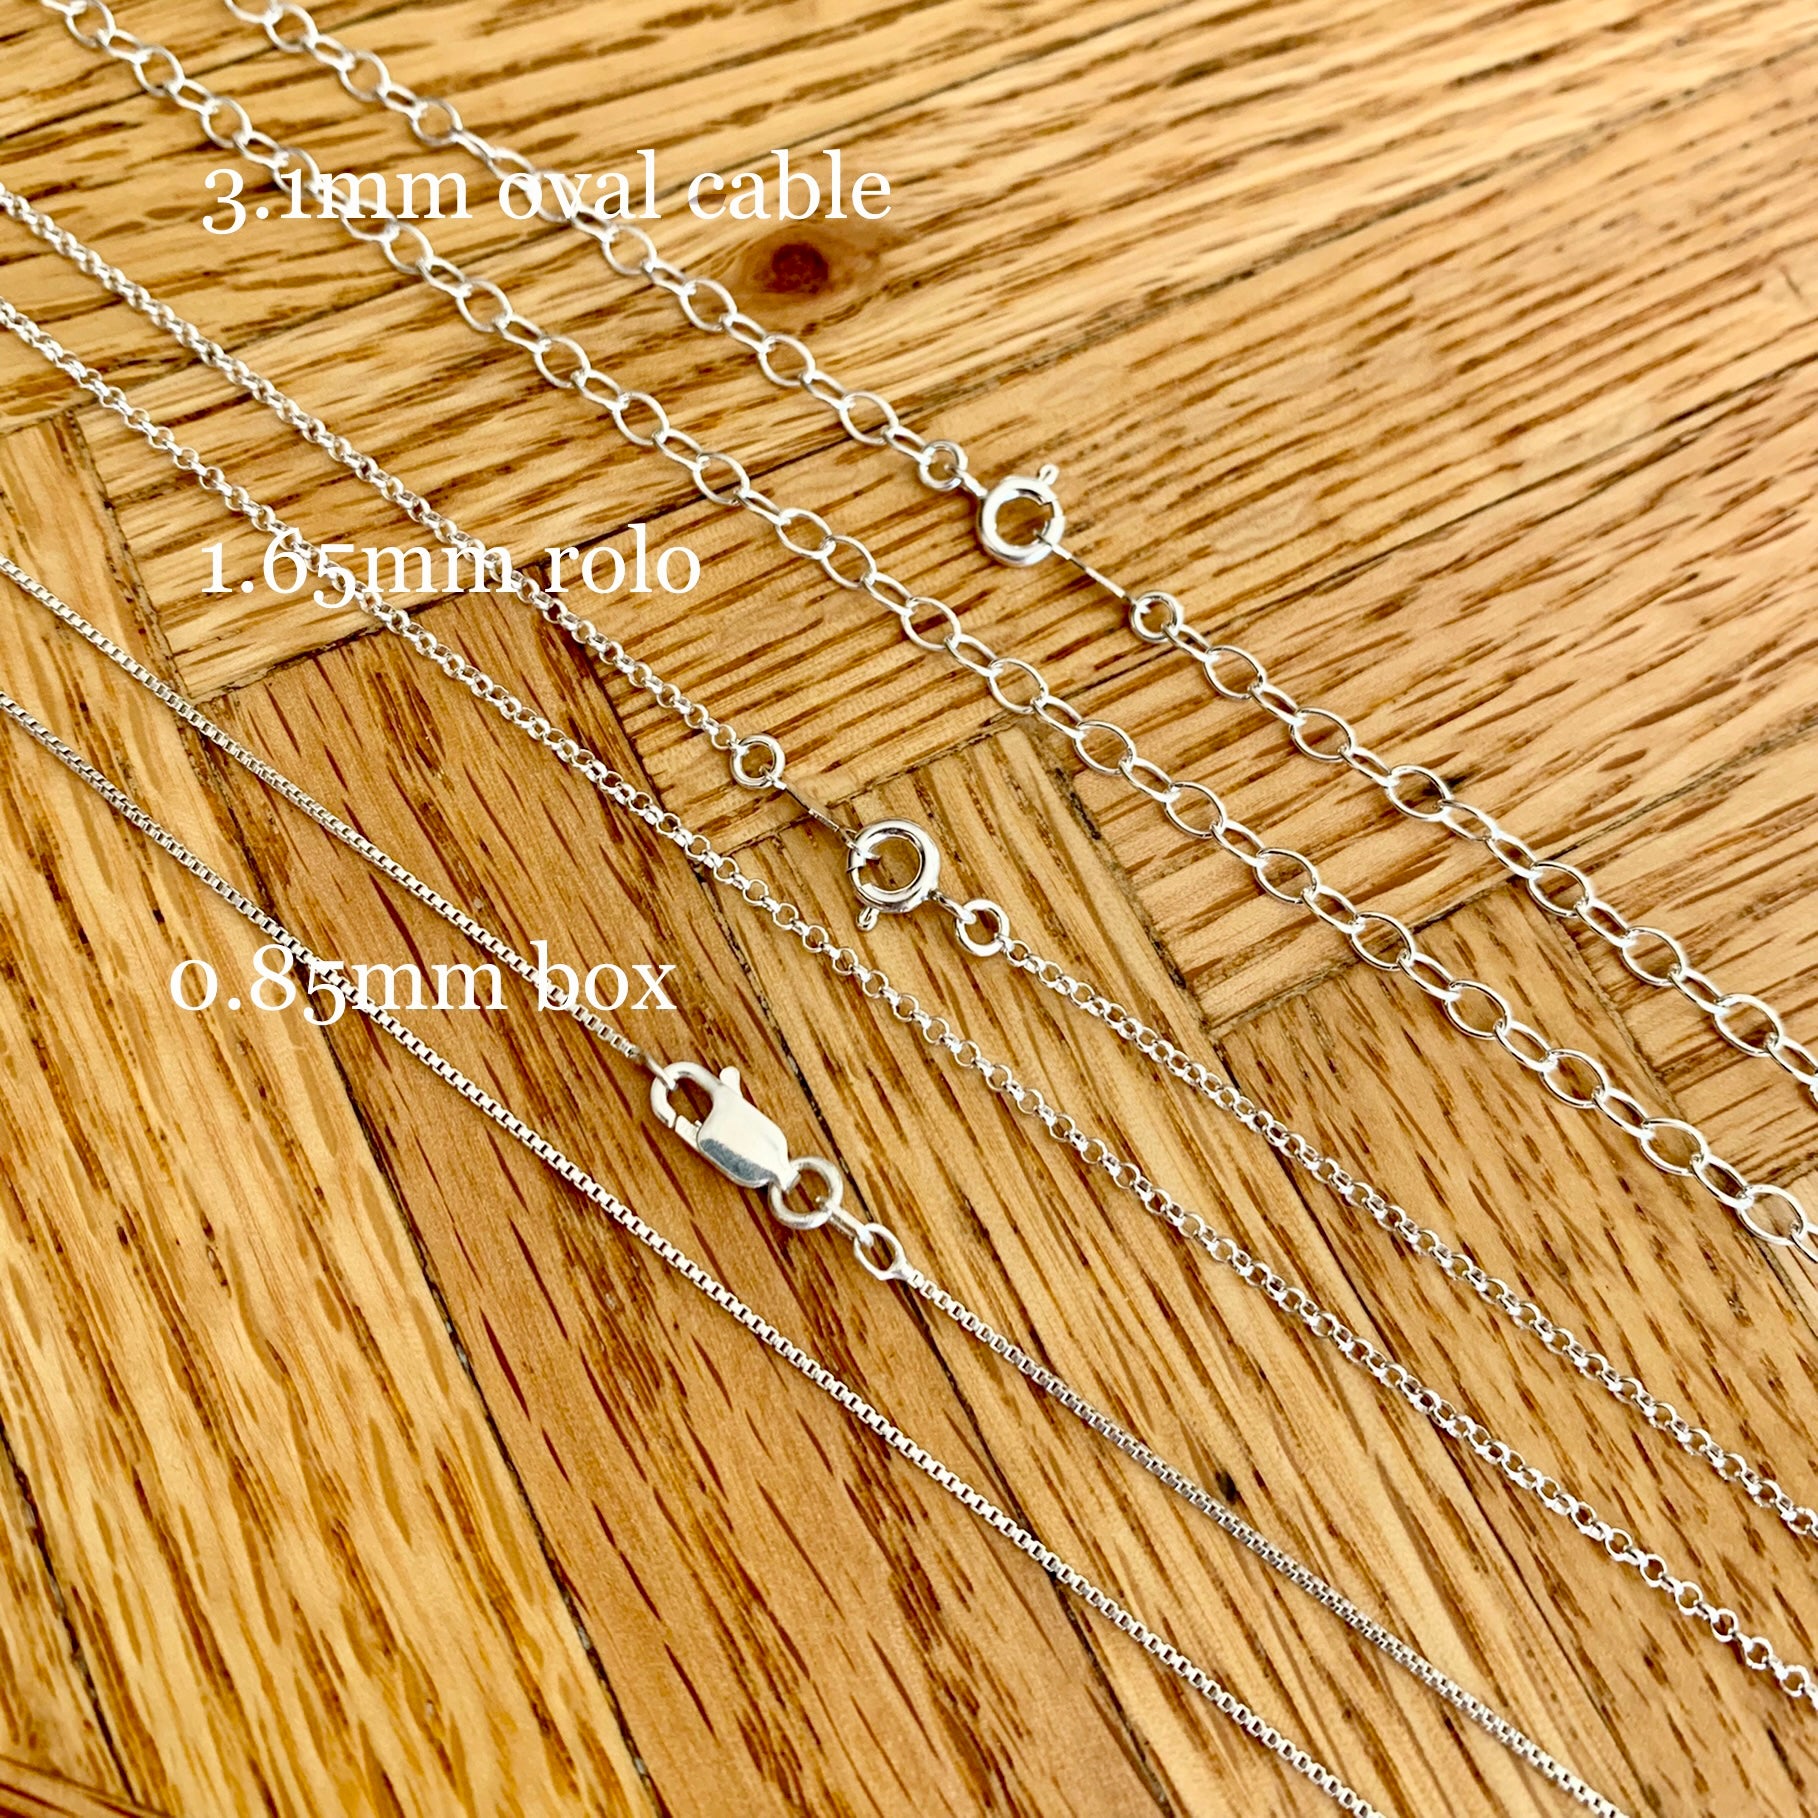 Sterling silver chain necklace - finished chain - box chain 0.85mm, rolo chain 1.65mm, cable chain 3.1mm